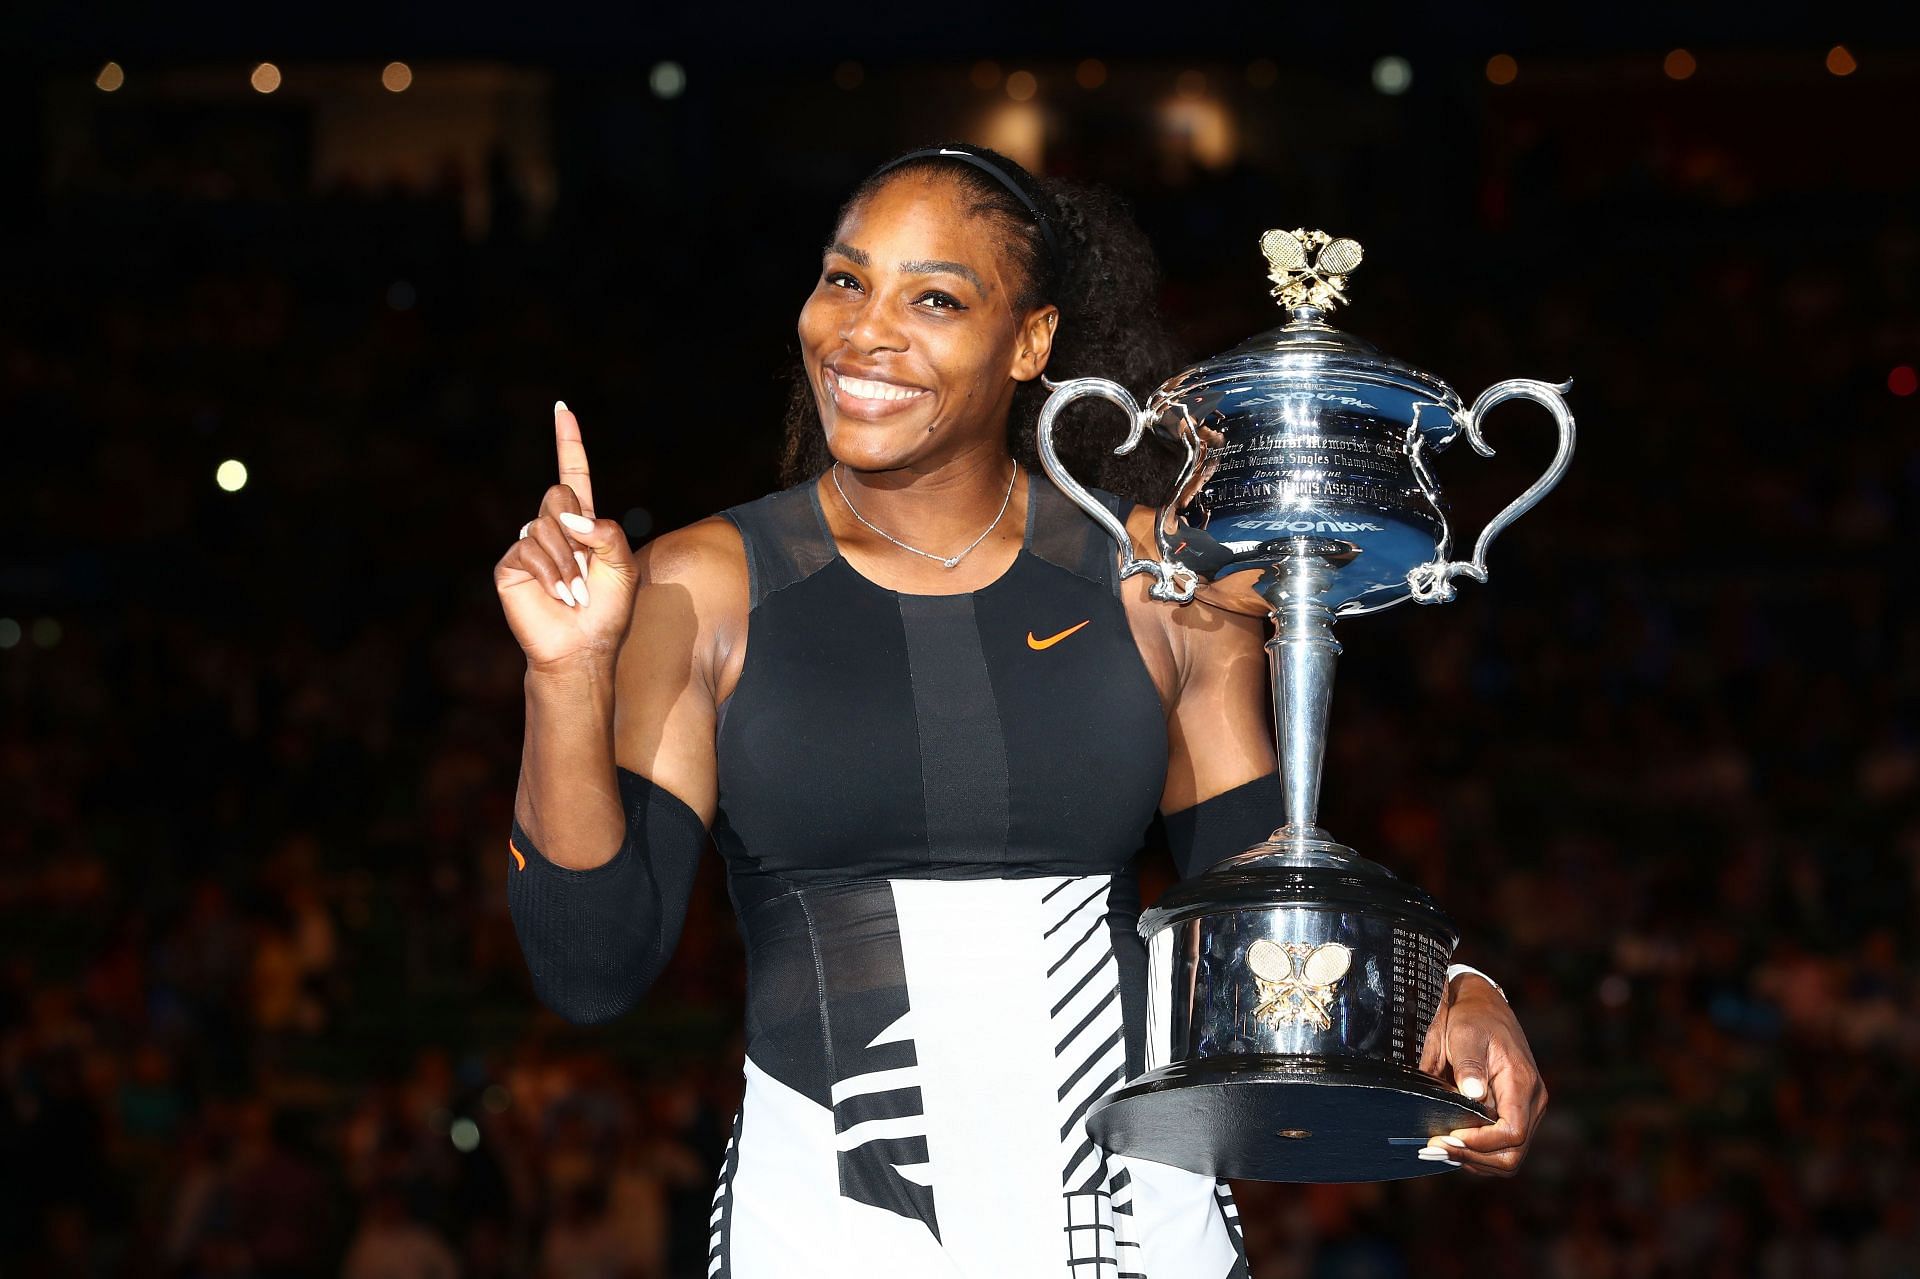 Williams with the 2017 Australian Open title